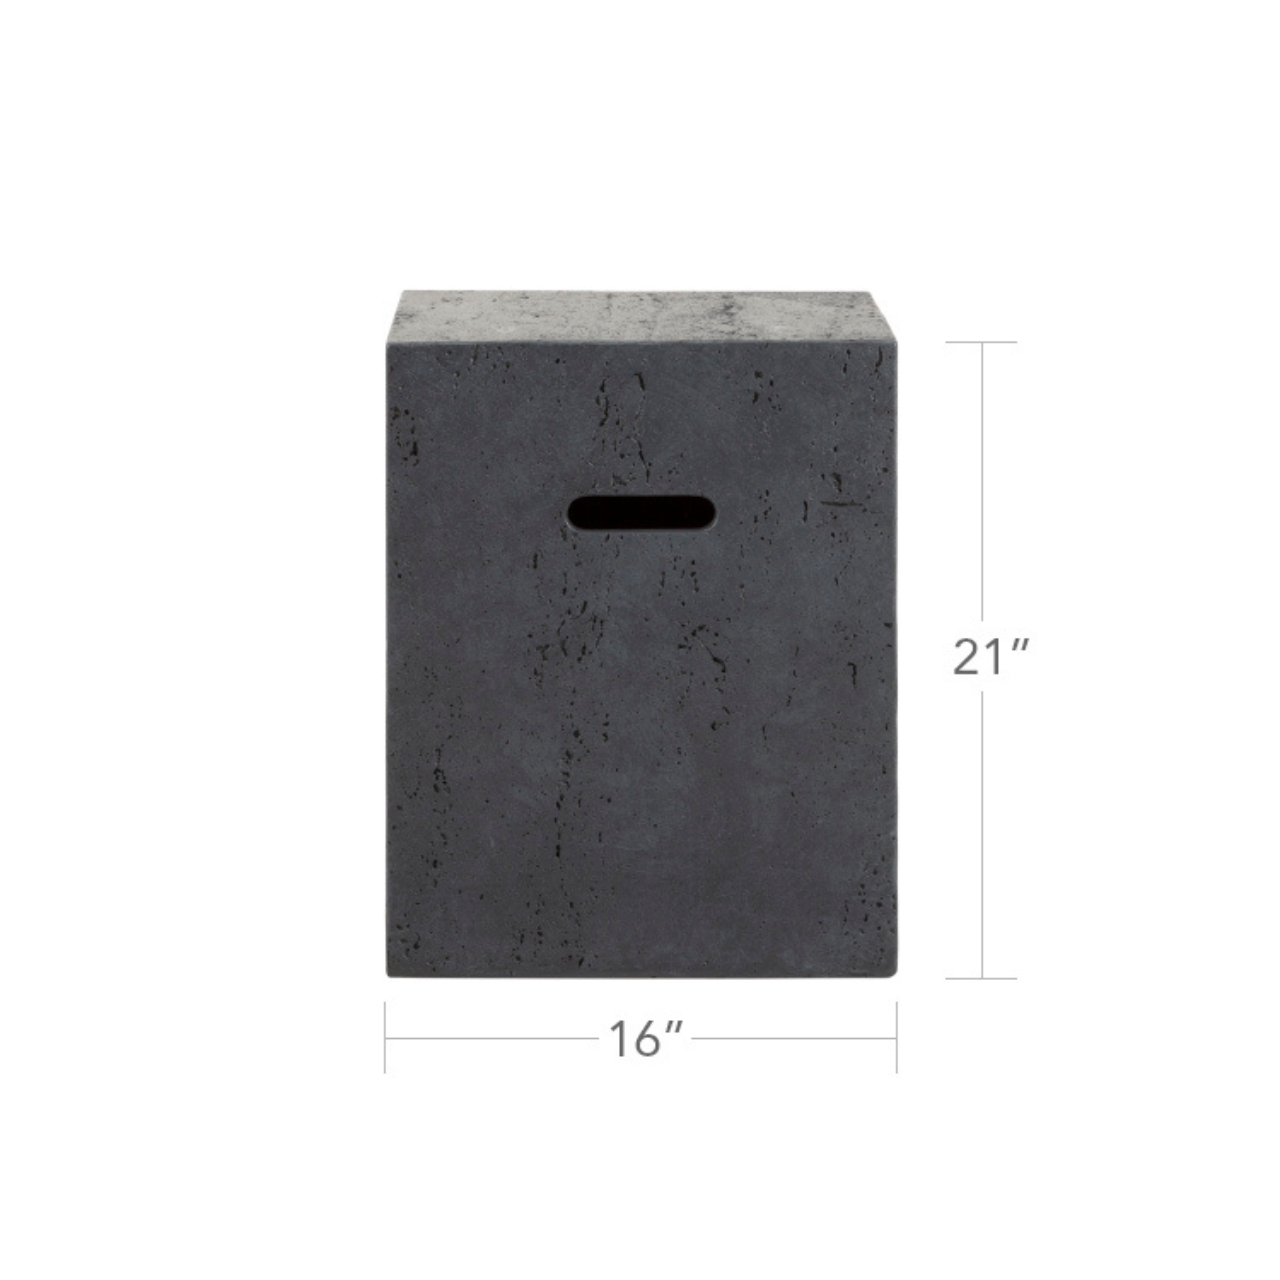 A concrete square gas tank with a handle.